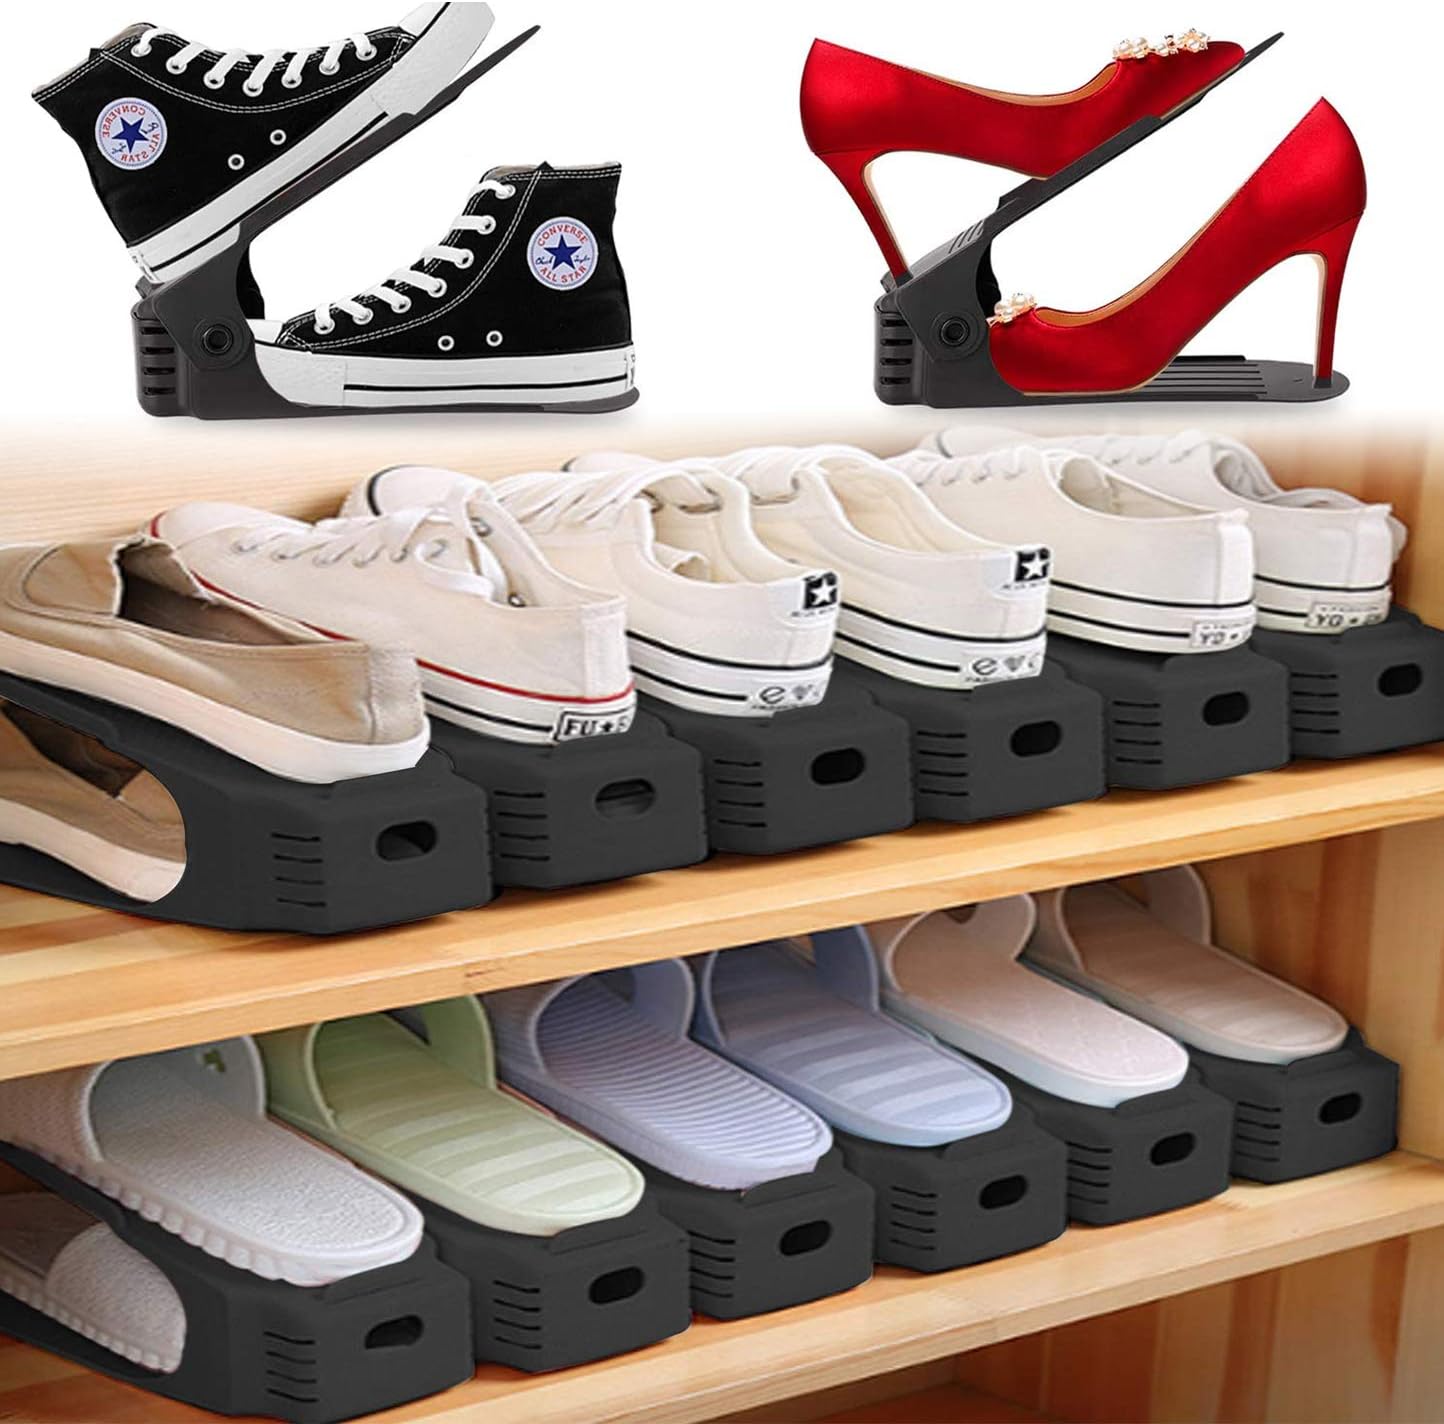 Looking For Extra Shoe Storage. Try These Space-Saving Solutions